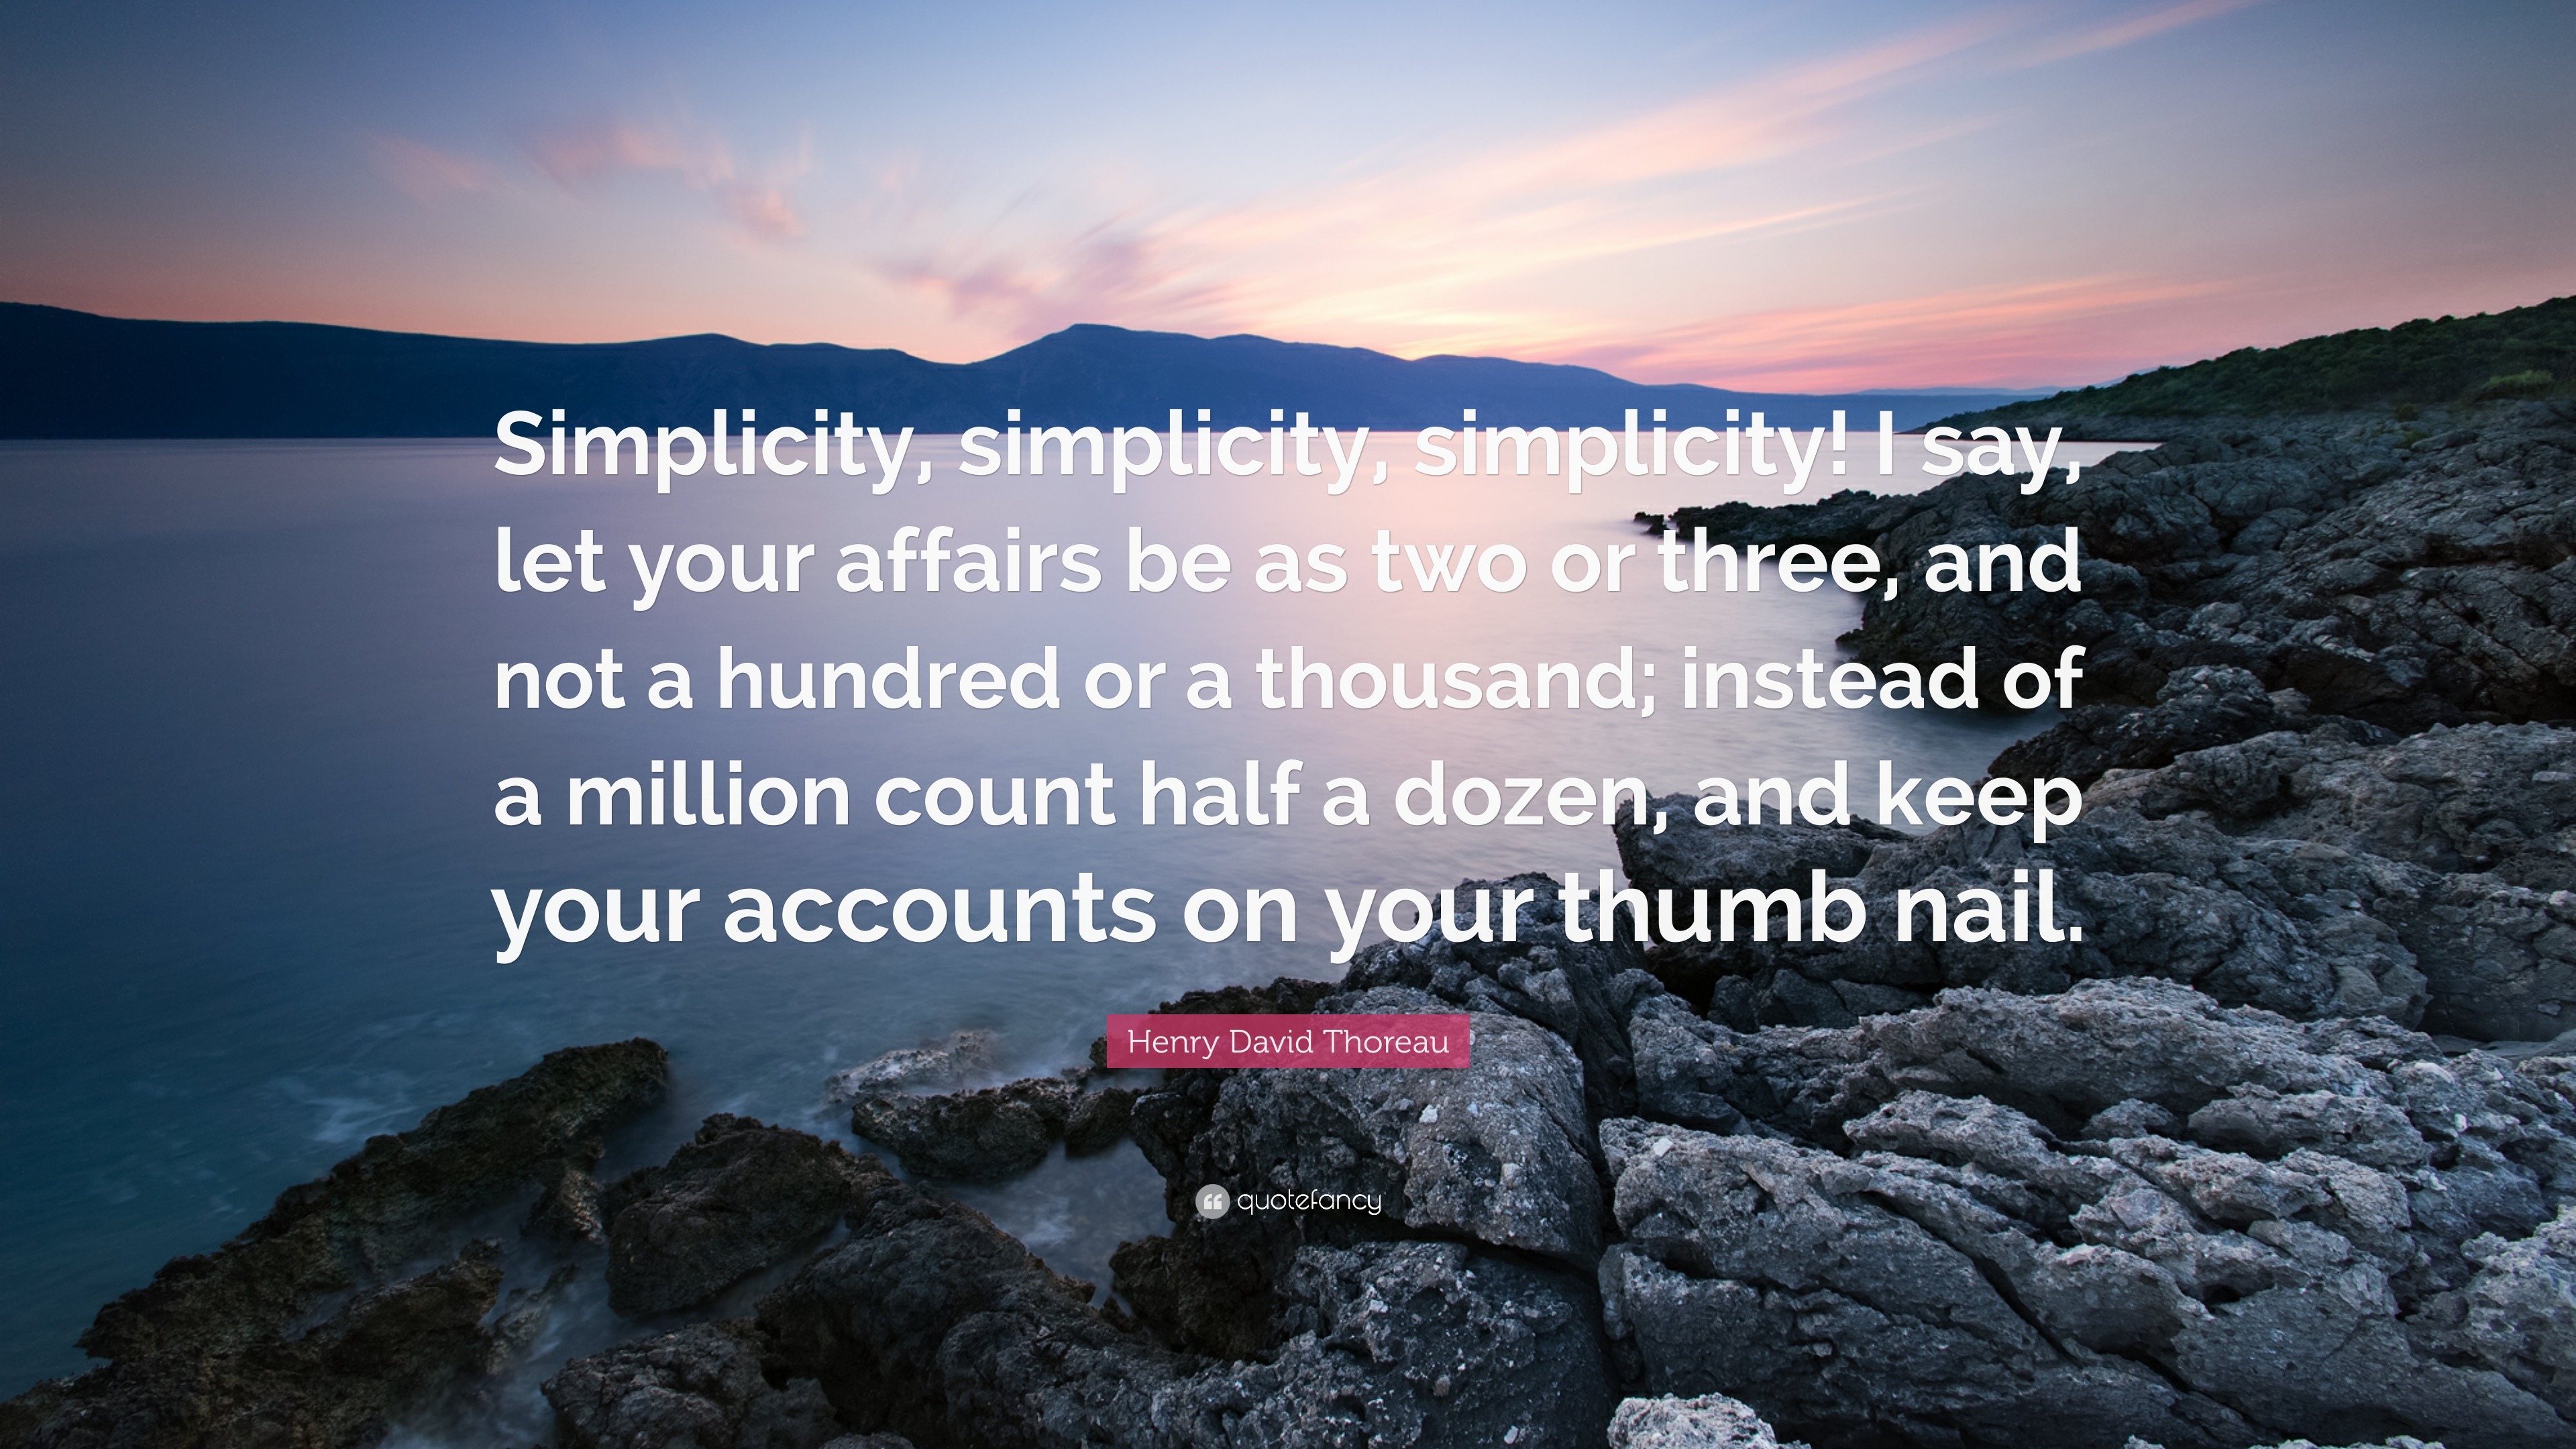 Henry David Thoreau Quote “simplicity Simplicity Simplicity I Say Let Your Affairs Be As